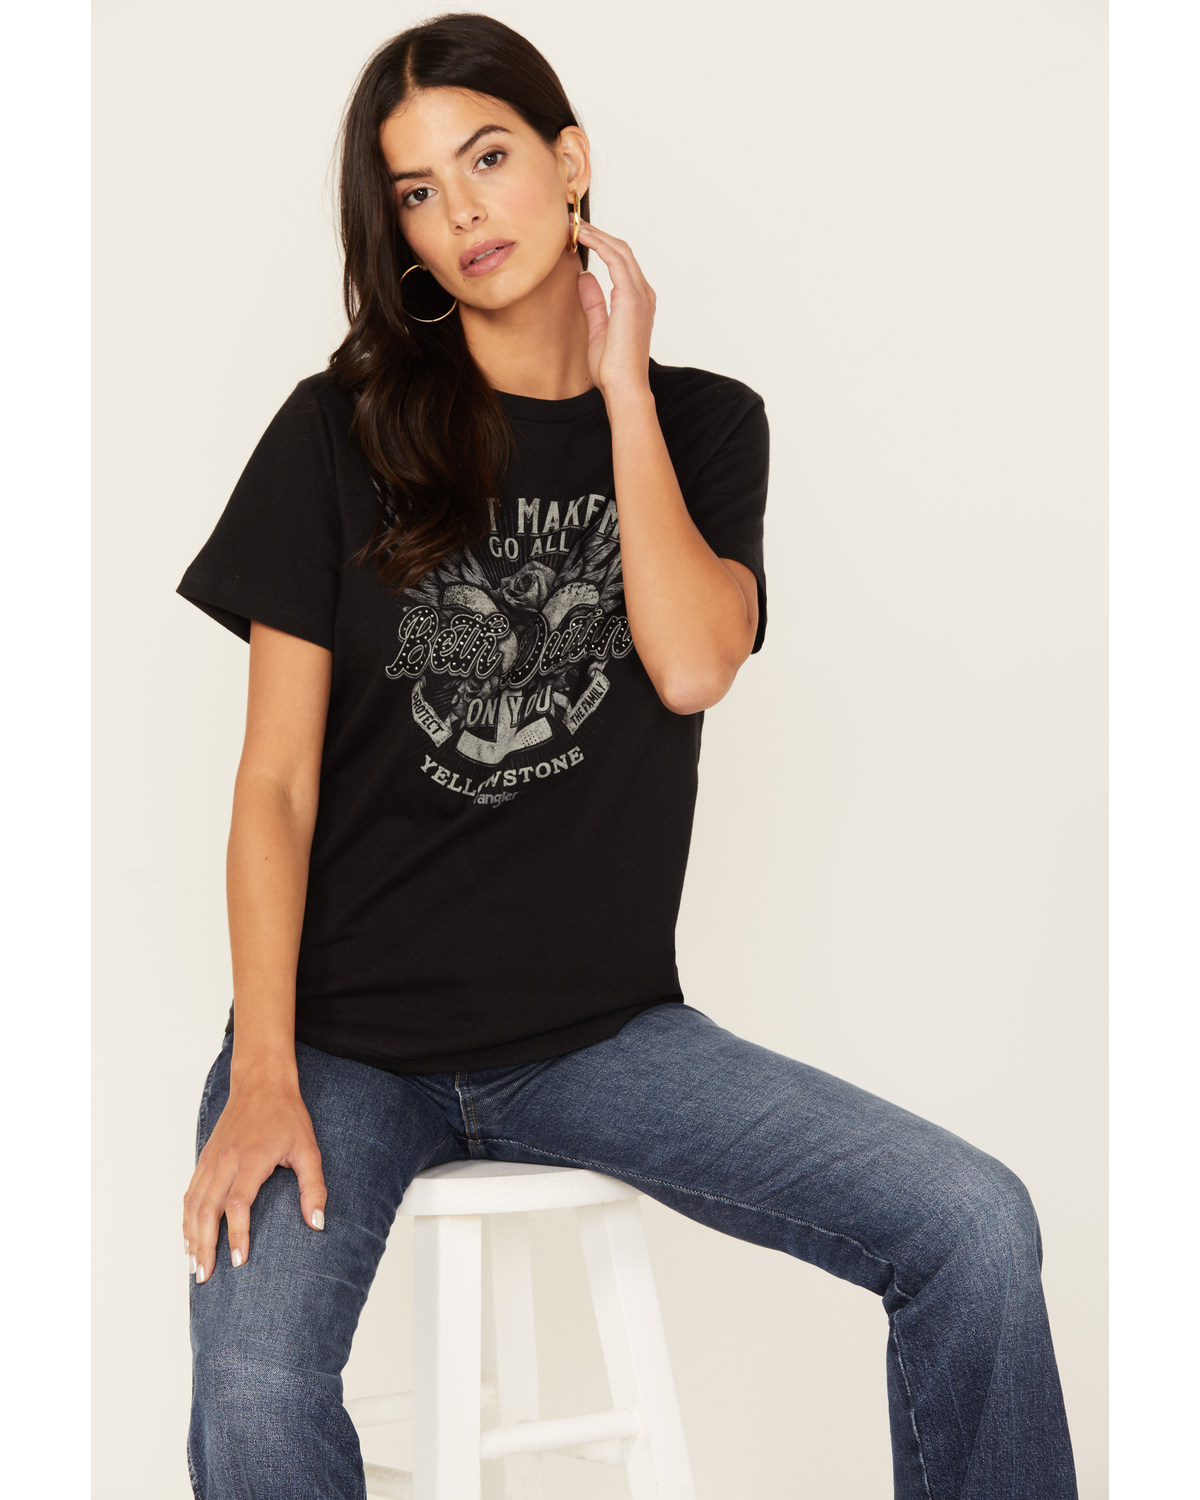 Wrangler Women's Yellowstone Don't Make Me Go All Beth Dutton On You Short Sleeve Graphic Tee